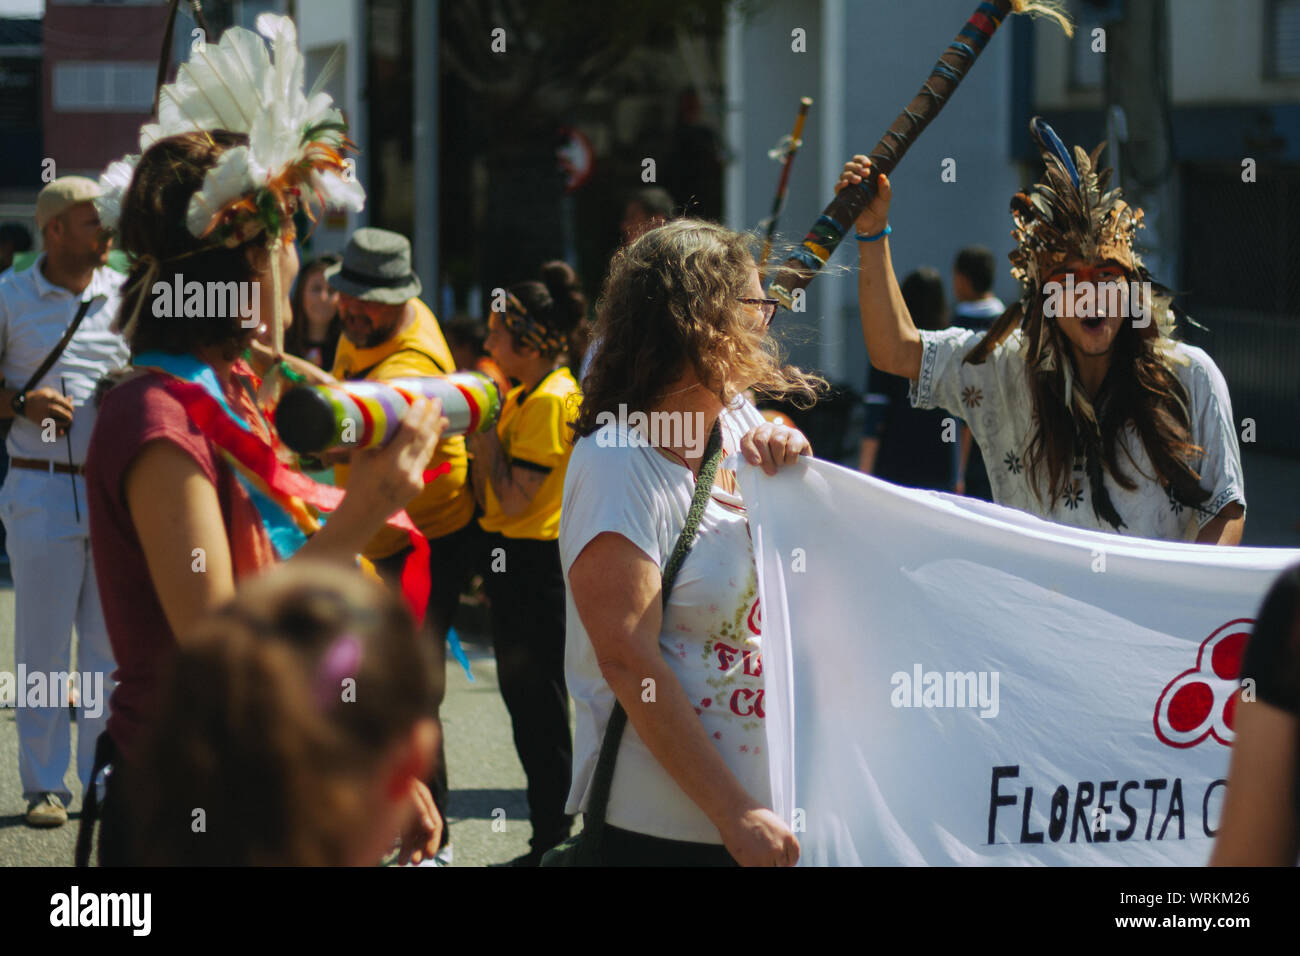 Crowd in the streets with a protester dressed as indigenous in a pro environment walk, protest during the brazilian independence day Stock Photo